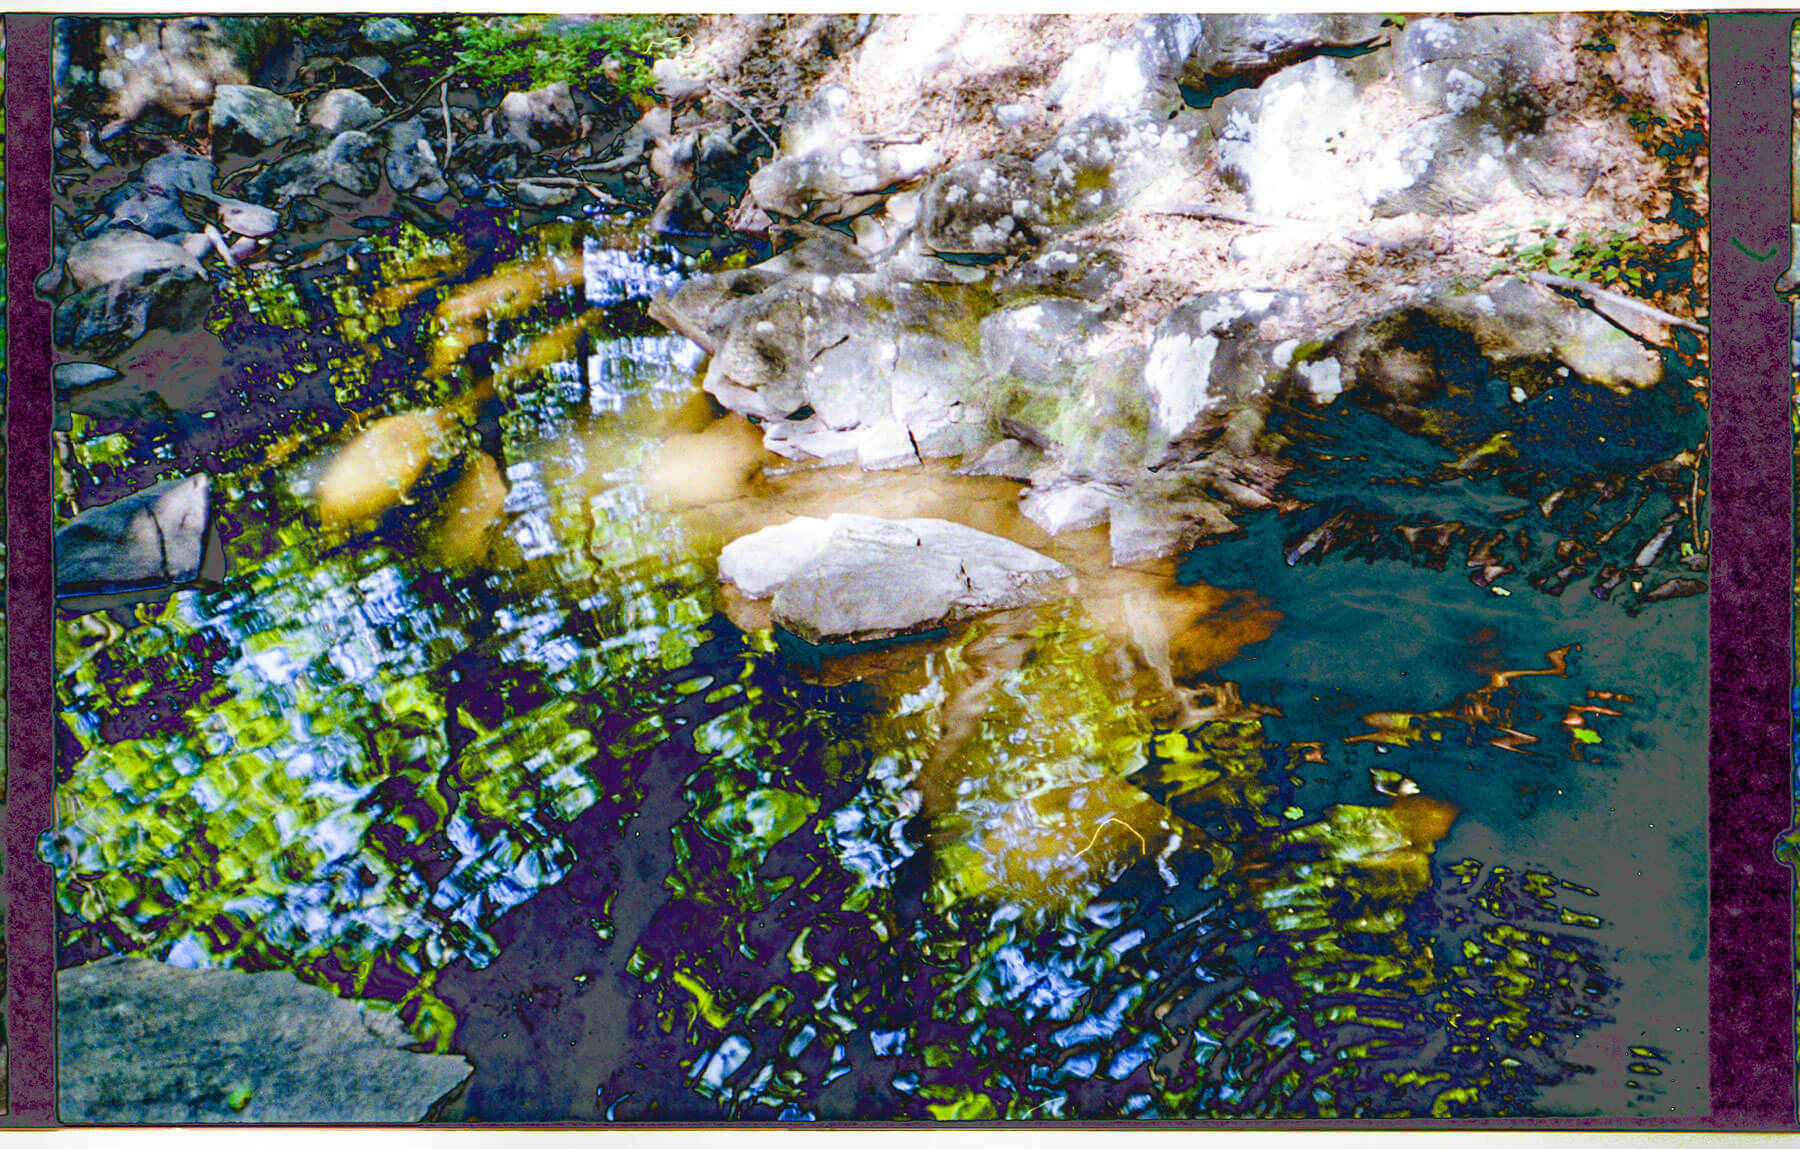 A photograph with layered exposures of rocks and water. The colors are vivid blues, greens, yellows, and white on a dark background.